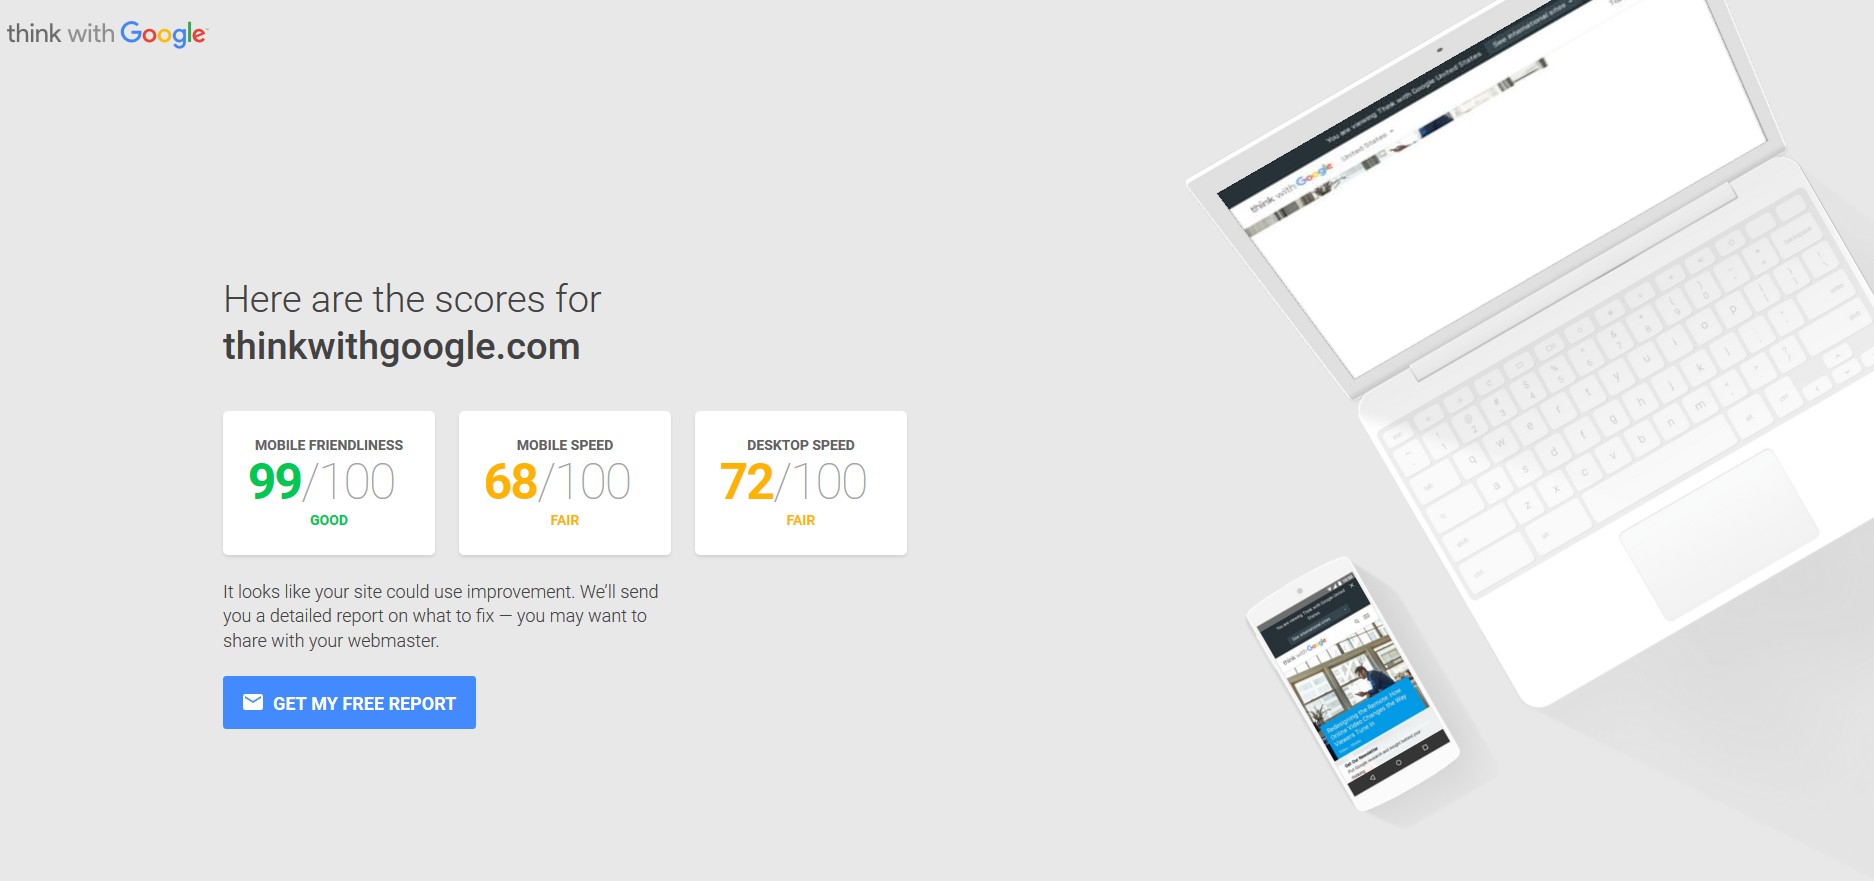 twg website - mobile and speed insights from think with google test tool